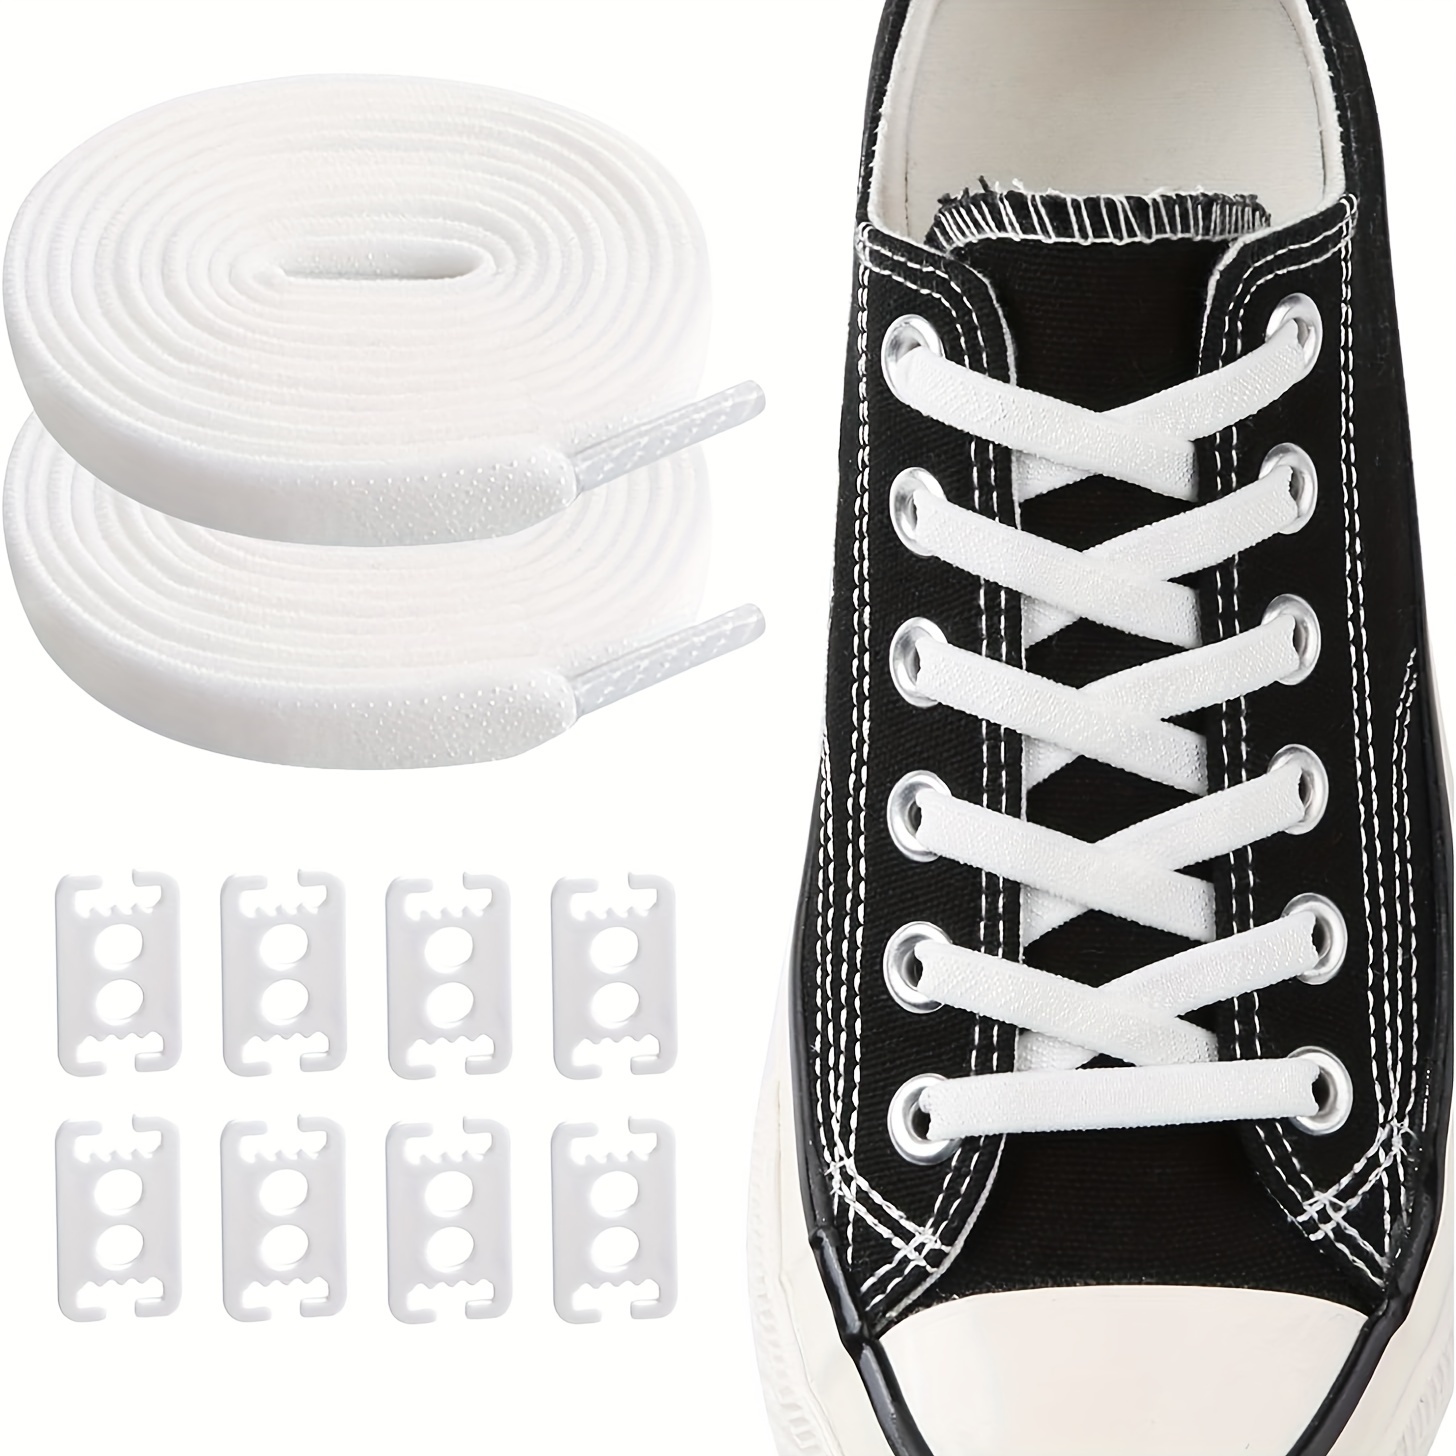 1pair White Elastic No Tie Shoelaces With One-click Buckle, Anti